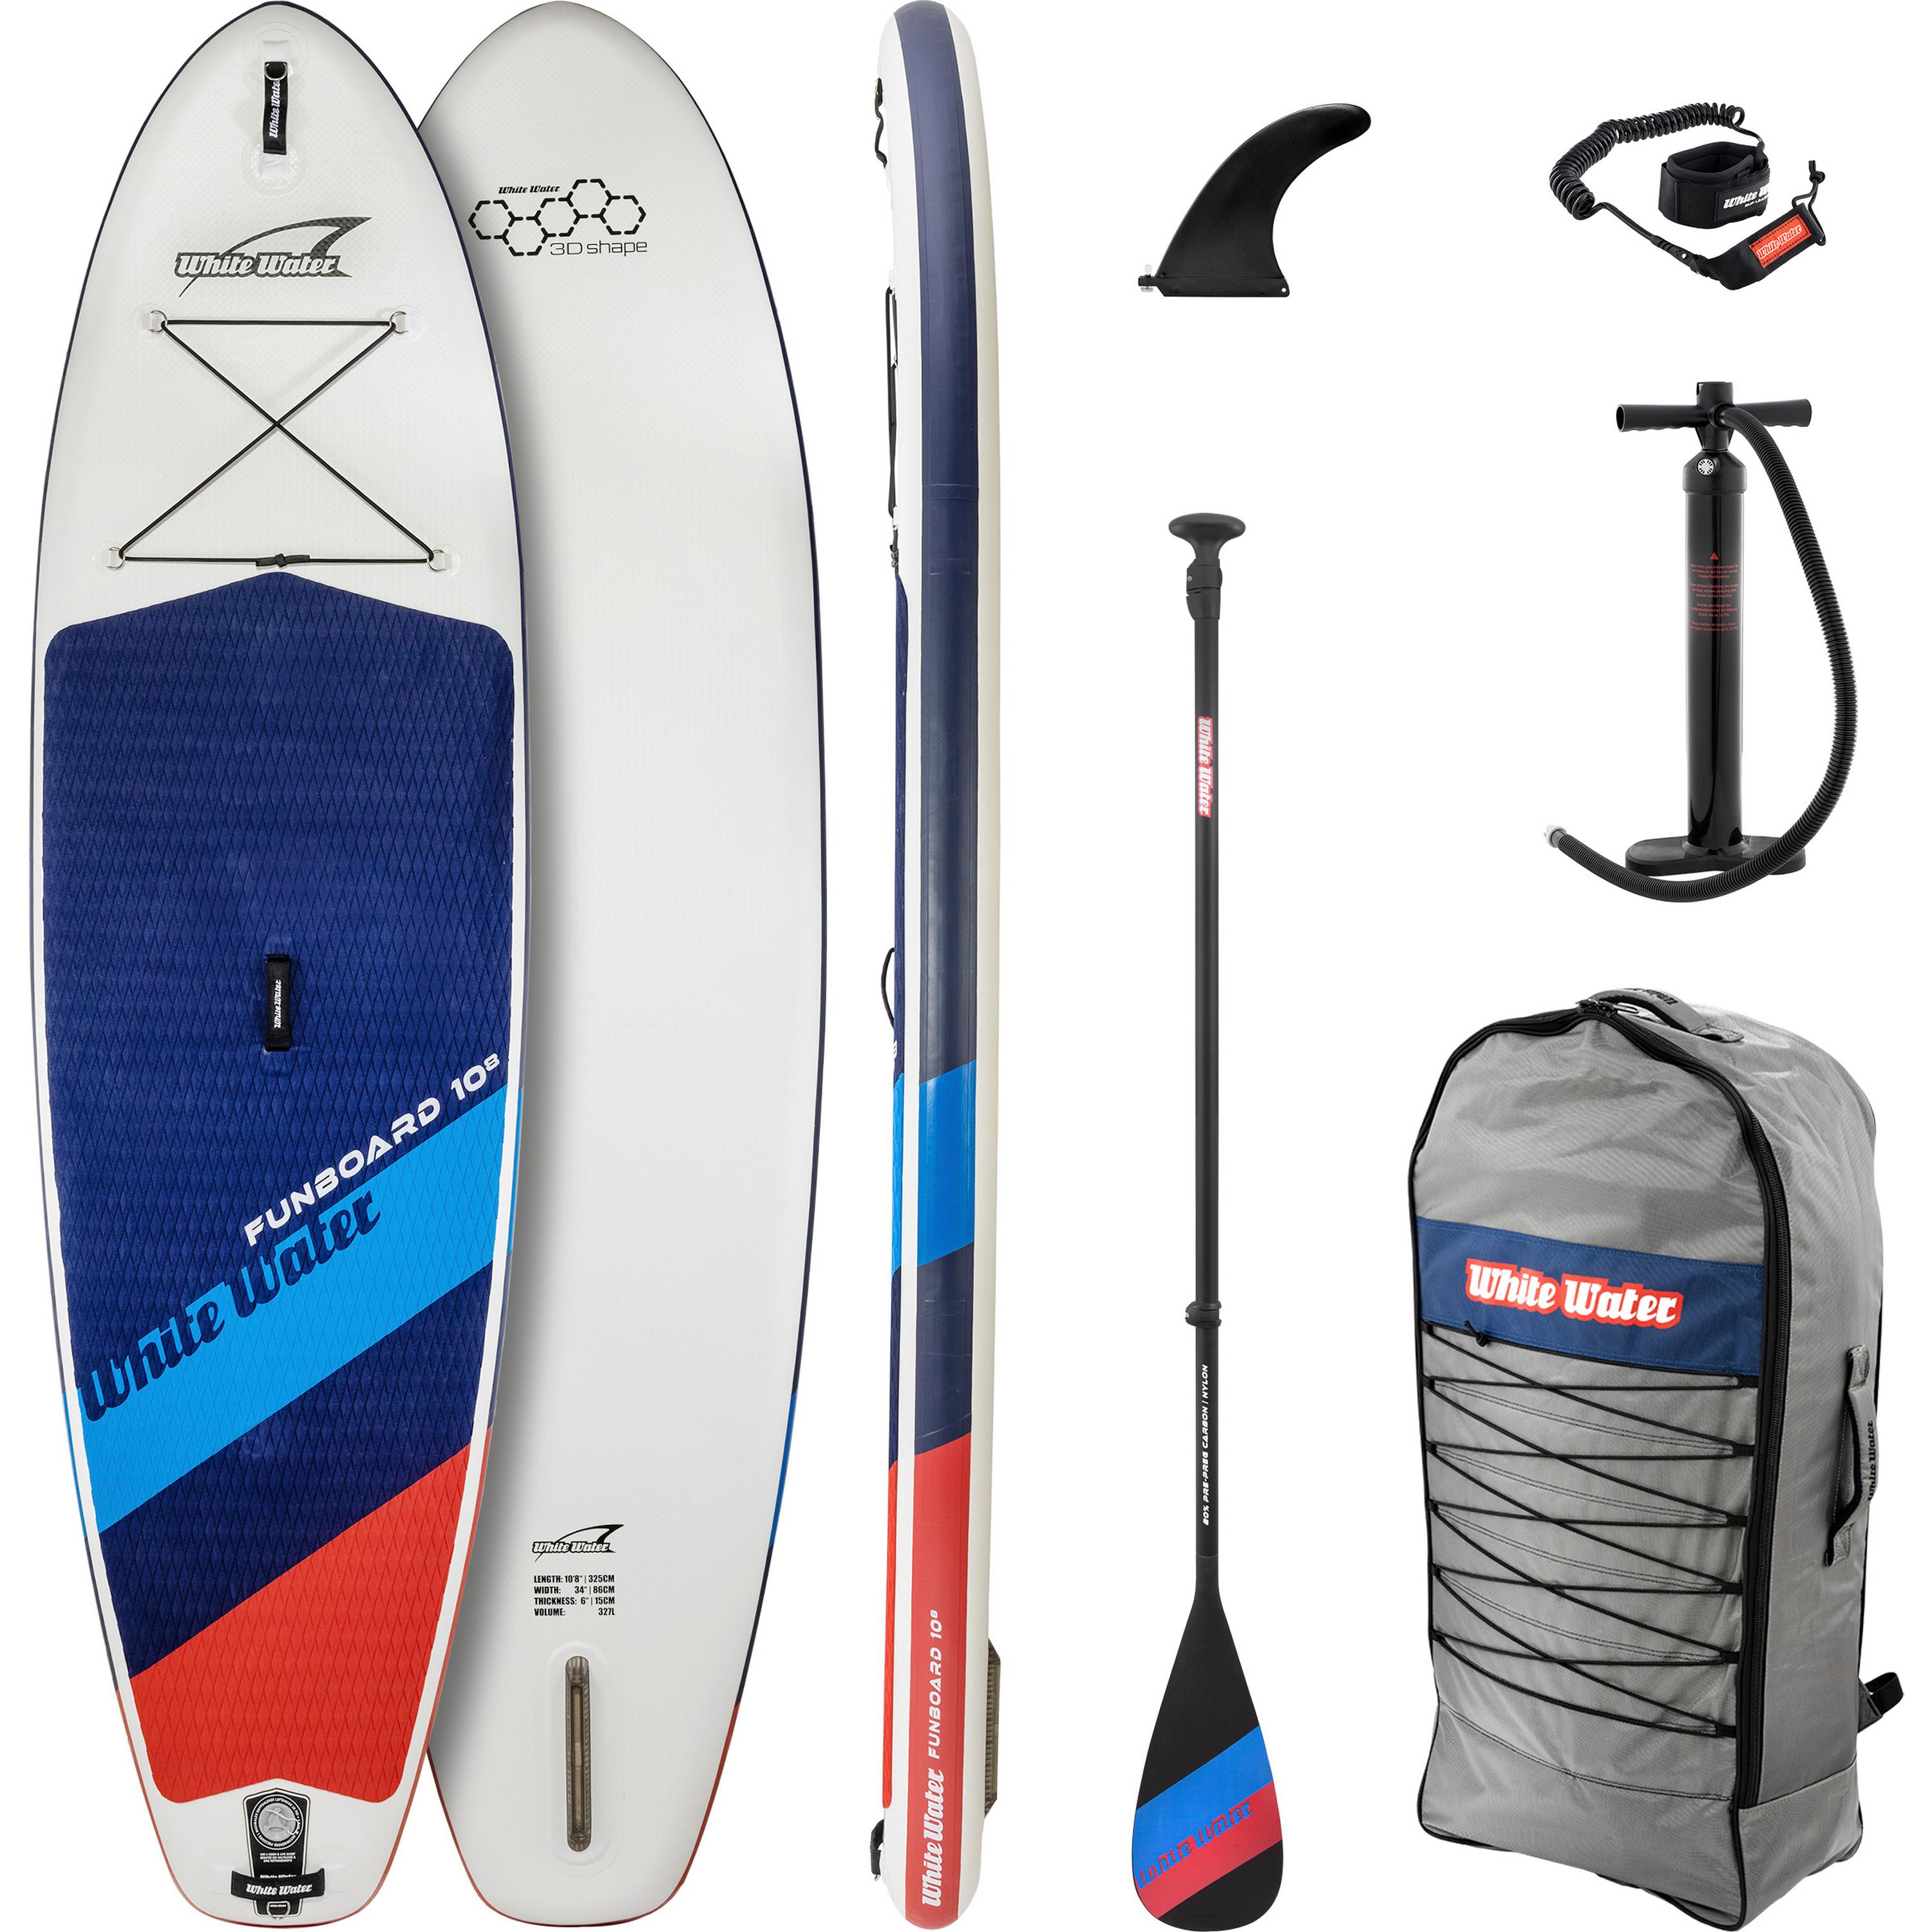 Image of WhiteWater SUP SET Deepwater 10'8" x 34" x 5" SUP Sets